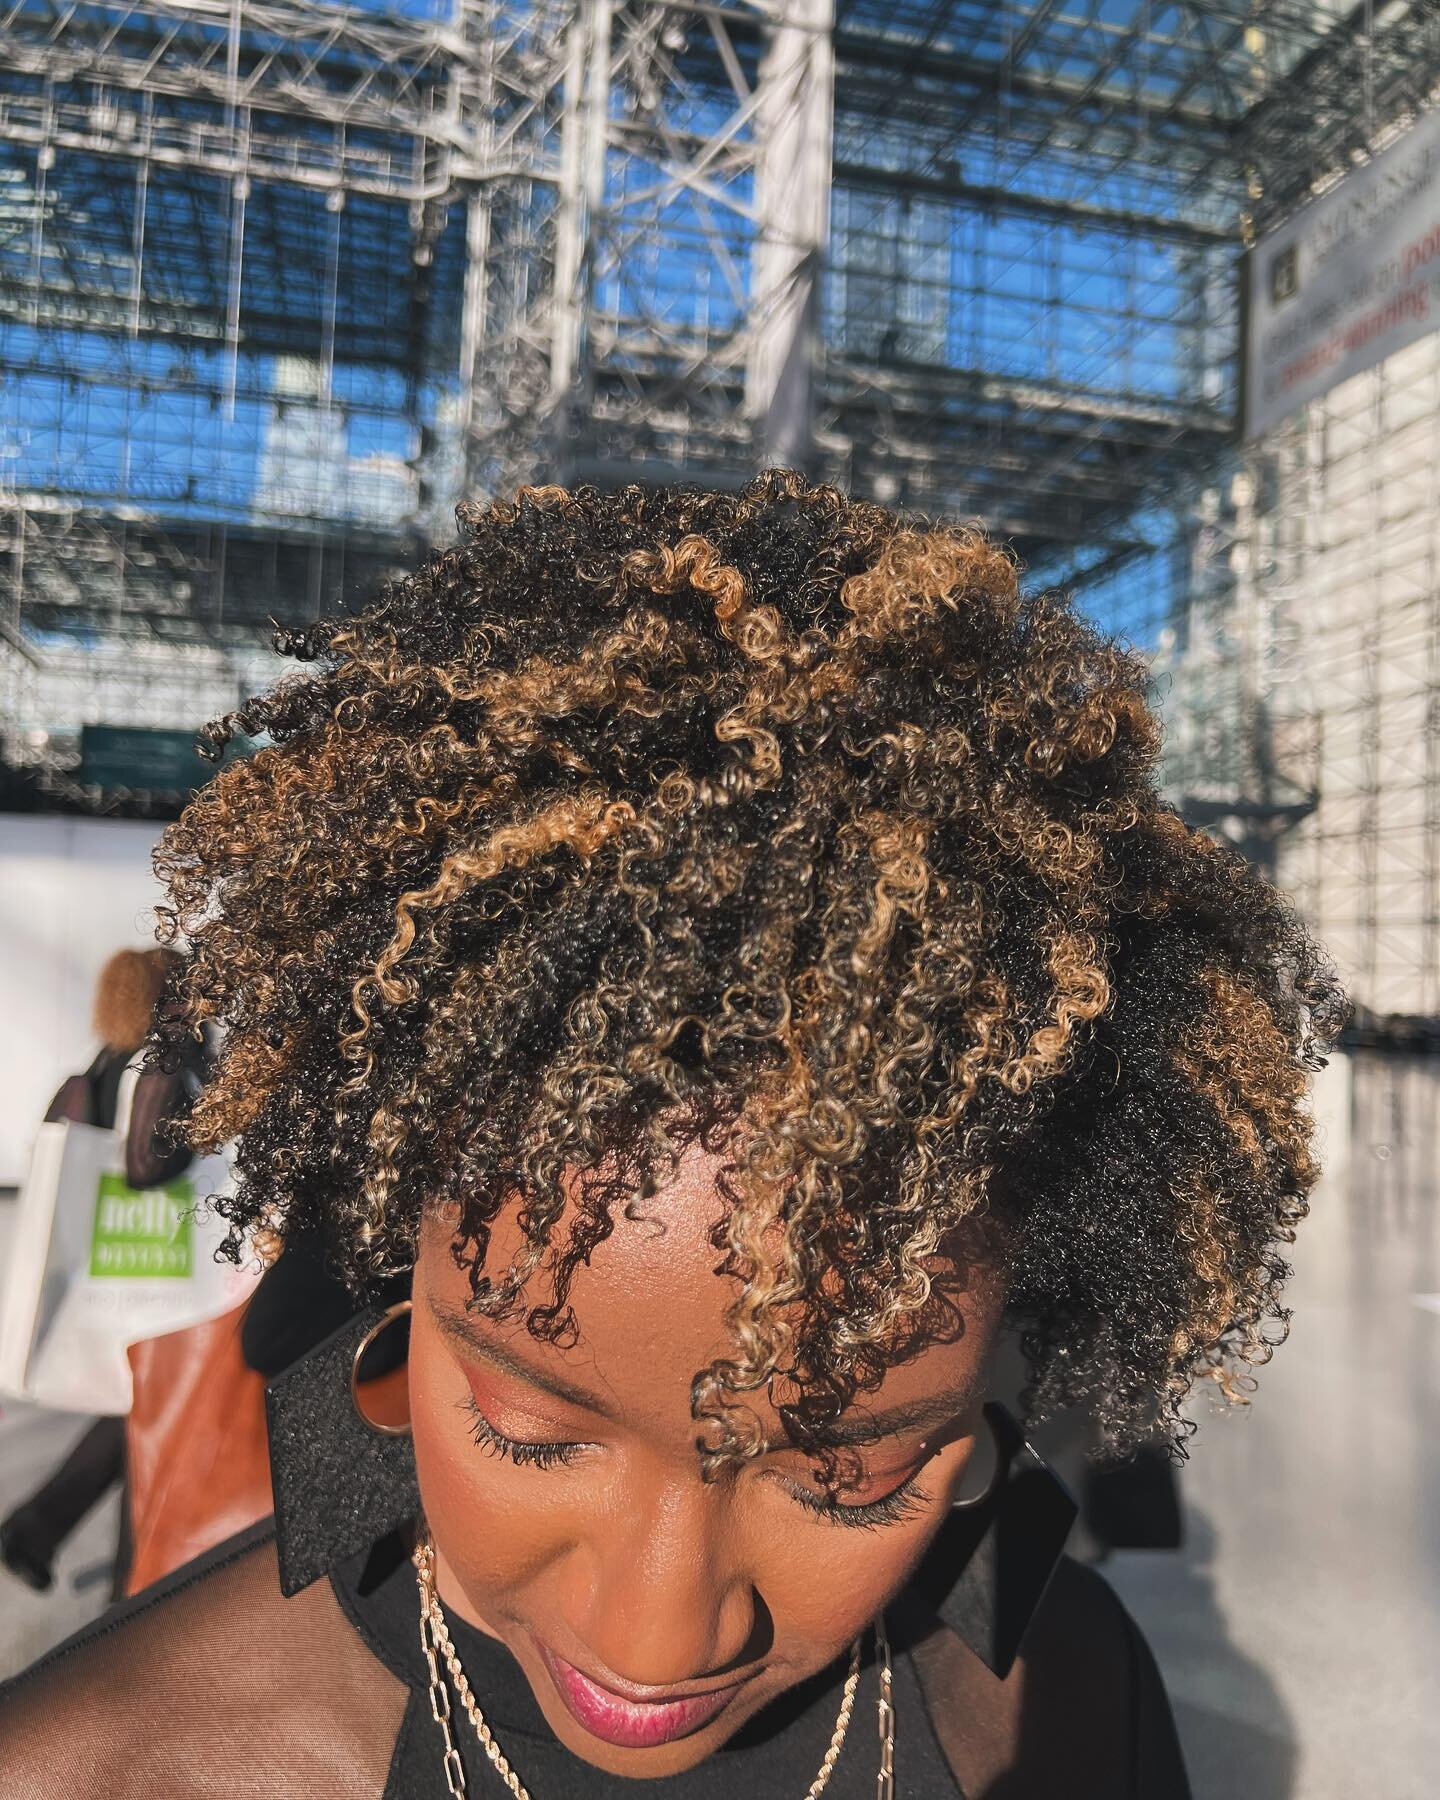 Day 1 at IBS New York @ibs_shows teaching Natural Hair 101 with my @texturevsrace Collab Coach @coiffed_by_dinah. 

I demonstrated a curl definition set on this beautiful model. 

I&rsquo;m honored to be able to share my passion and enabling  other p